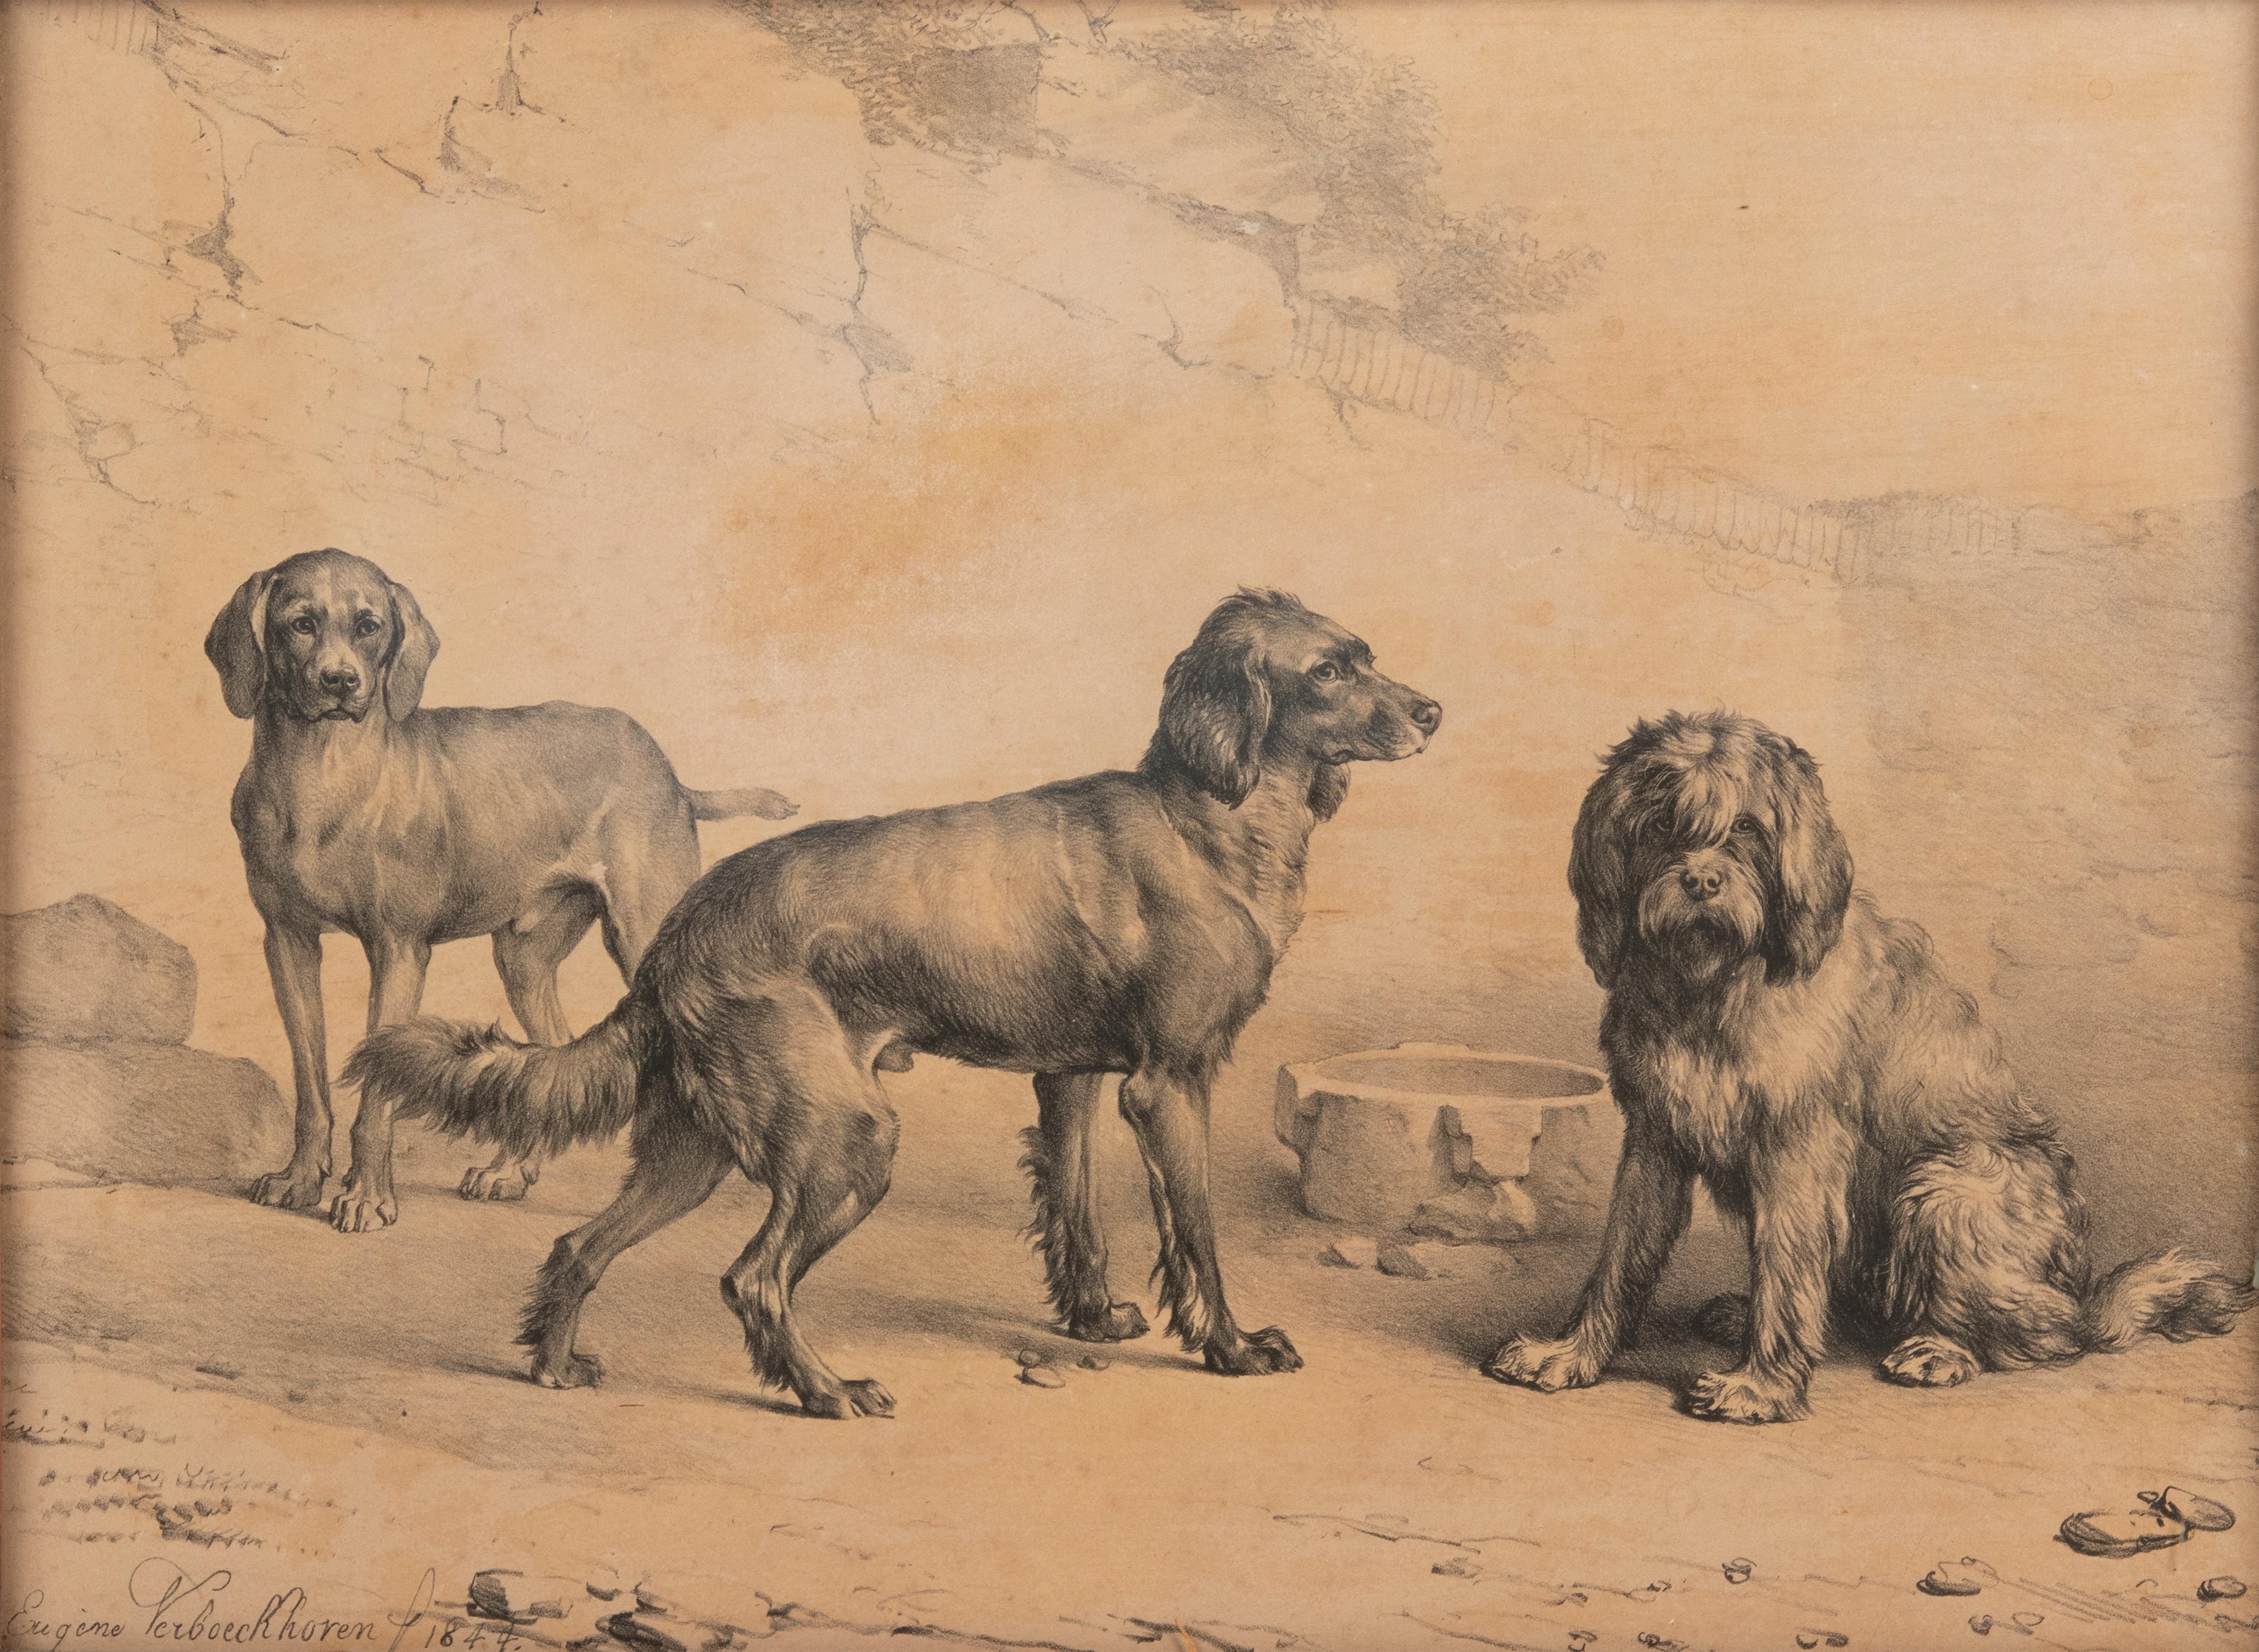 Lovely antique Litho Print with dogs, from the Belgian artist Eugène Verboeckhoven. 
The print is dated 1844. It is framed behind glass in a simple wooden frame, pine wood. The frame dates from the same period as the print. 
In good condition.